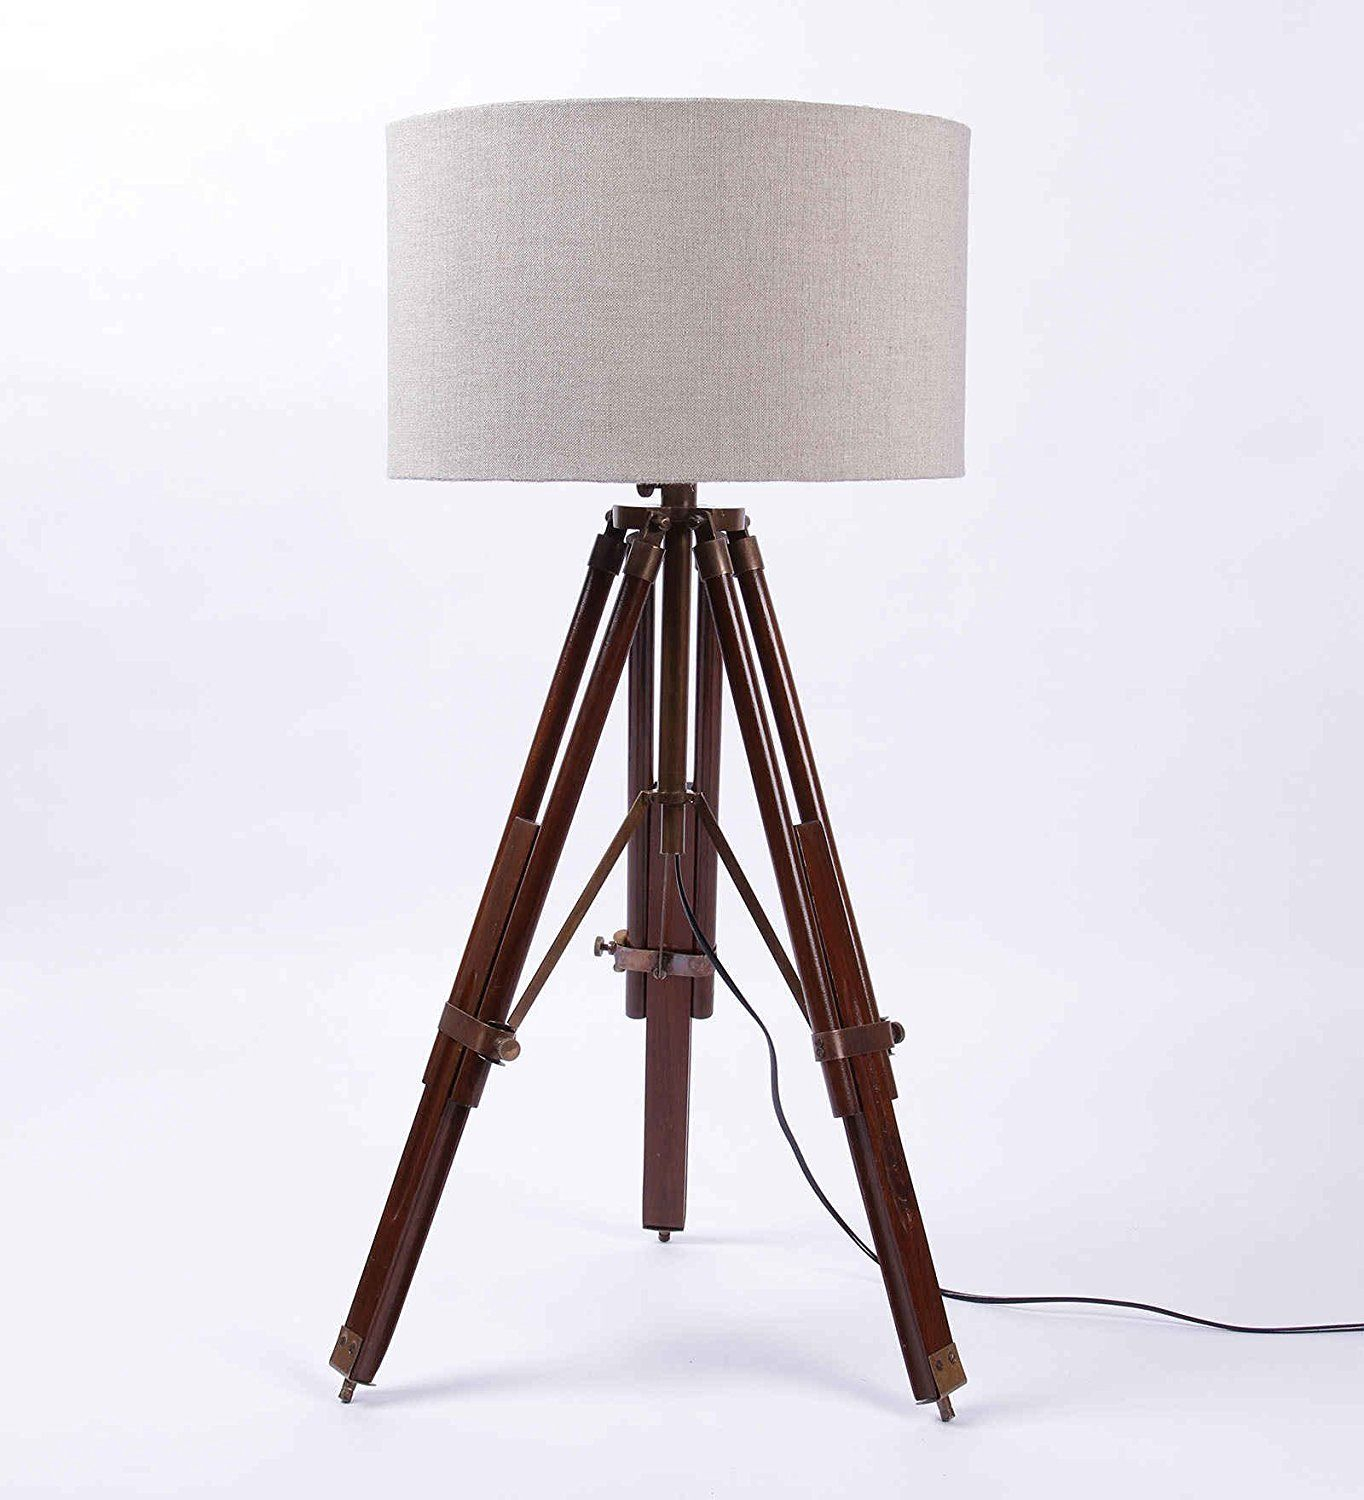 Nauticalmart Vintage Tripod Floor Lamp Nautical Adjustable intended for proportions 1364 X 1500